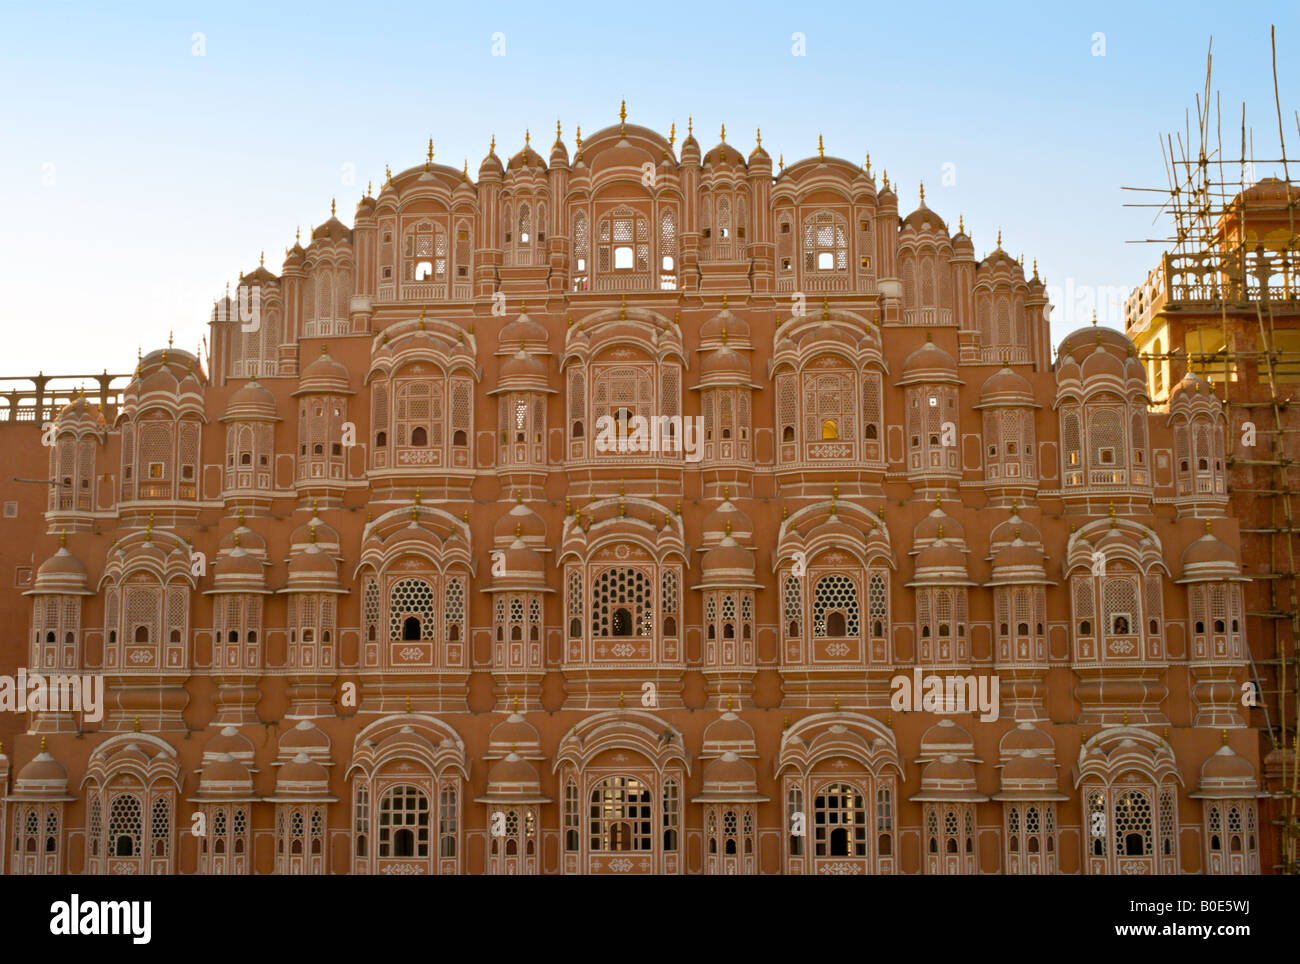 INDIA JAIPUR Hawa Mahal, also known as the Wind Palace, is a palace built in the form of the crown of Krishna the Hindu god. Stock Photo